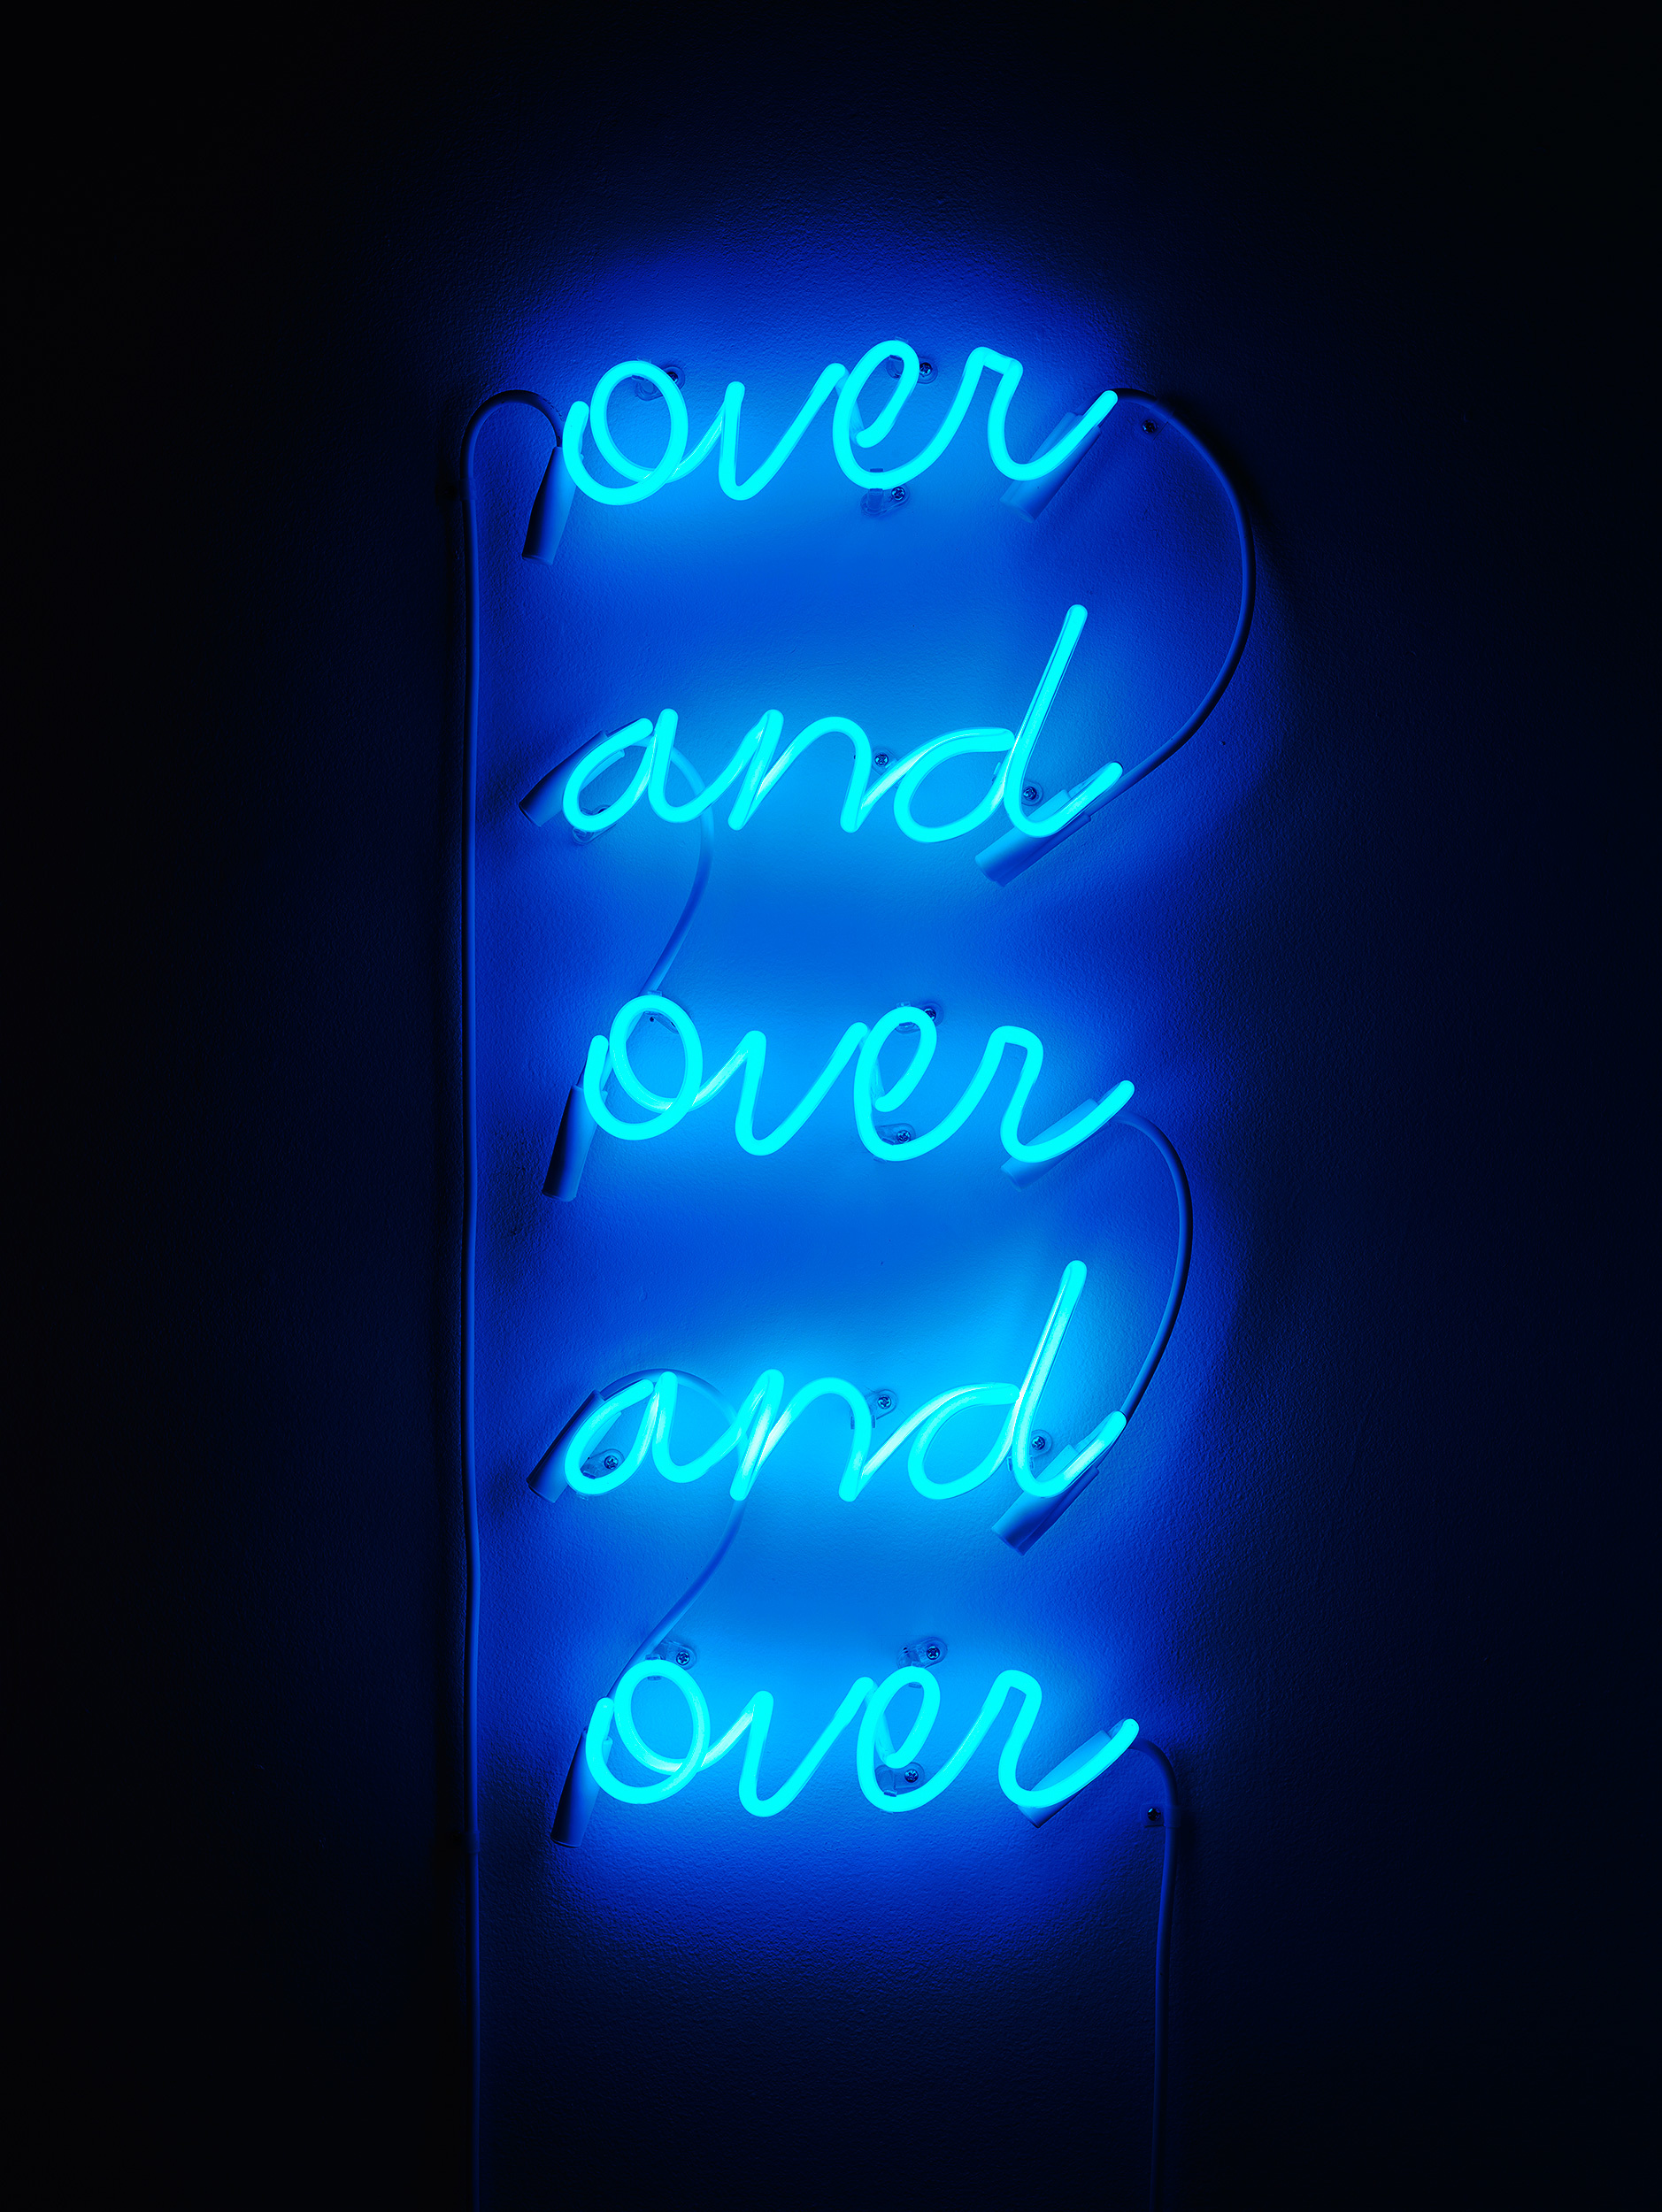  Over and Over and Over, 2016 neon  27 x 10 x 2 in. (69 x 25.5 x 5 cm) 